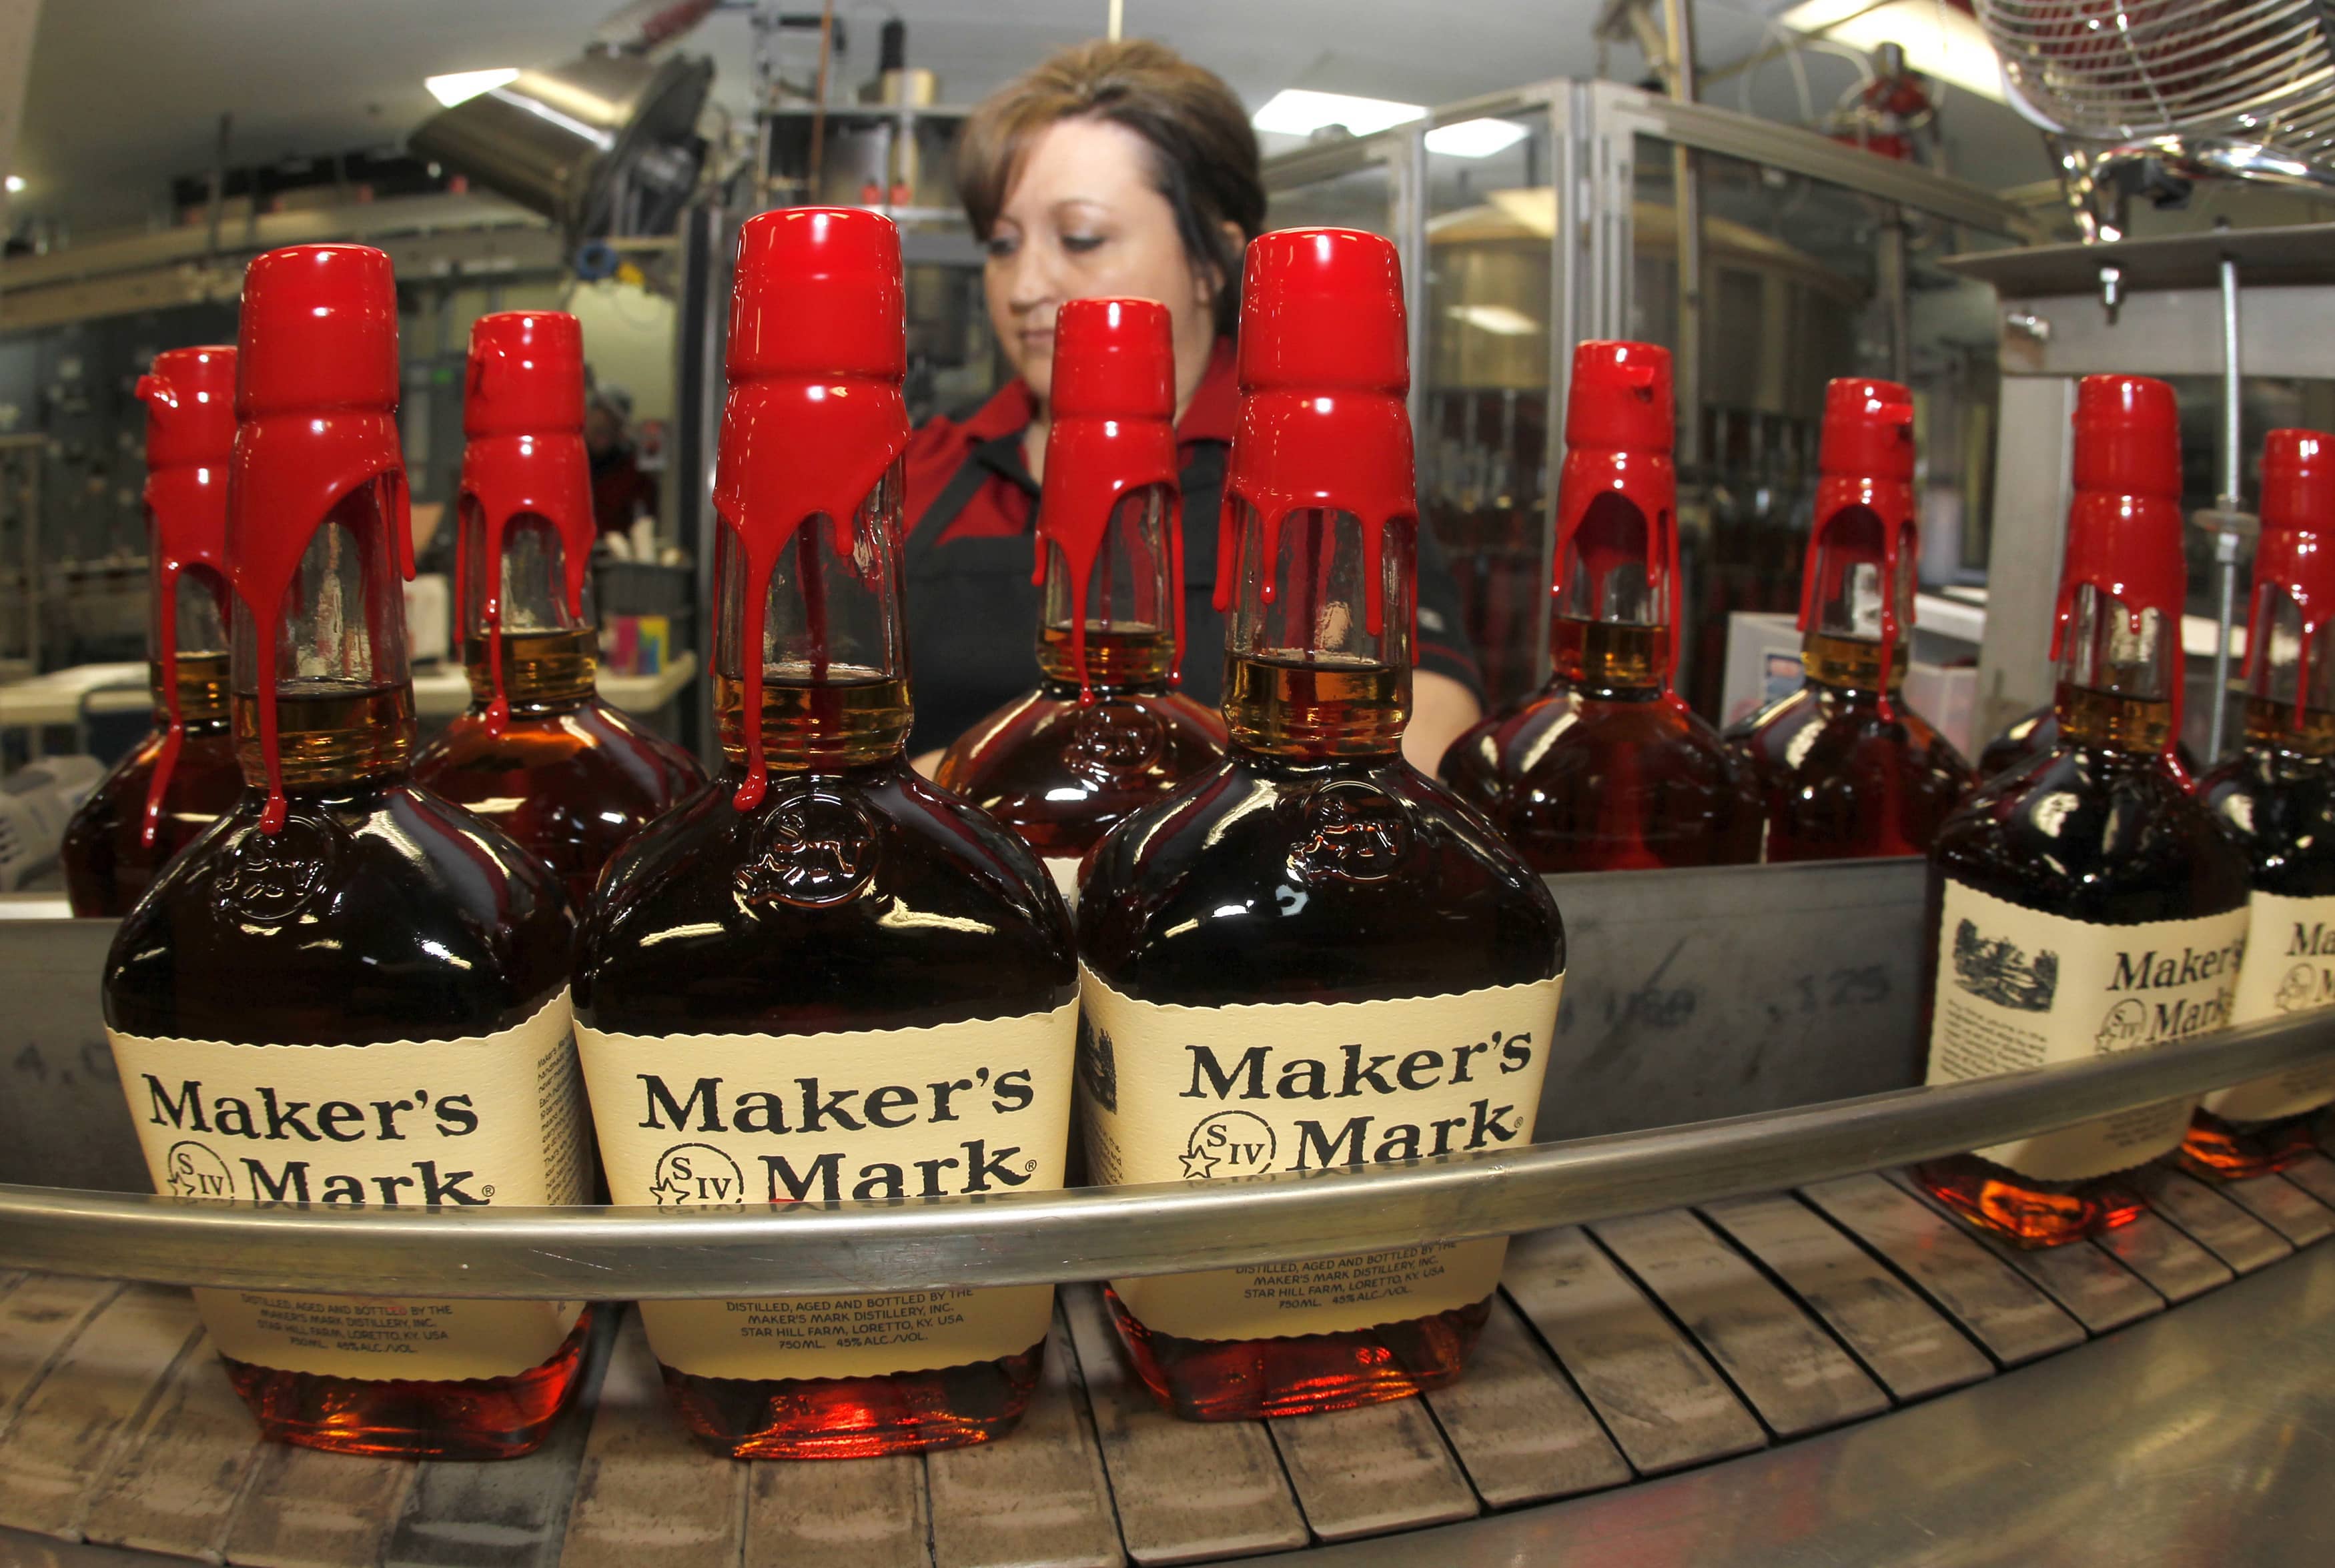 new-bottles-of-makers-mark-bourbon-on-the-conveyor-belt-pass-by-a-worker-after-being-hand-dipped-with-their-signature-red-wax-at-the-makers-mark-distillery-plant-in-loretto